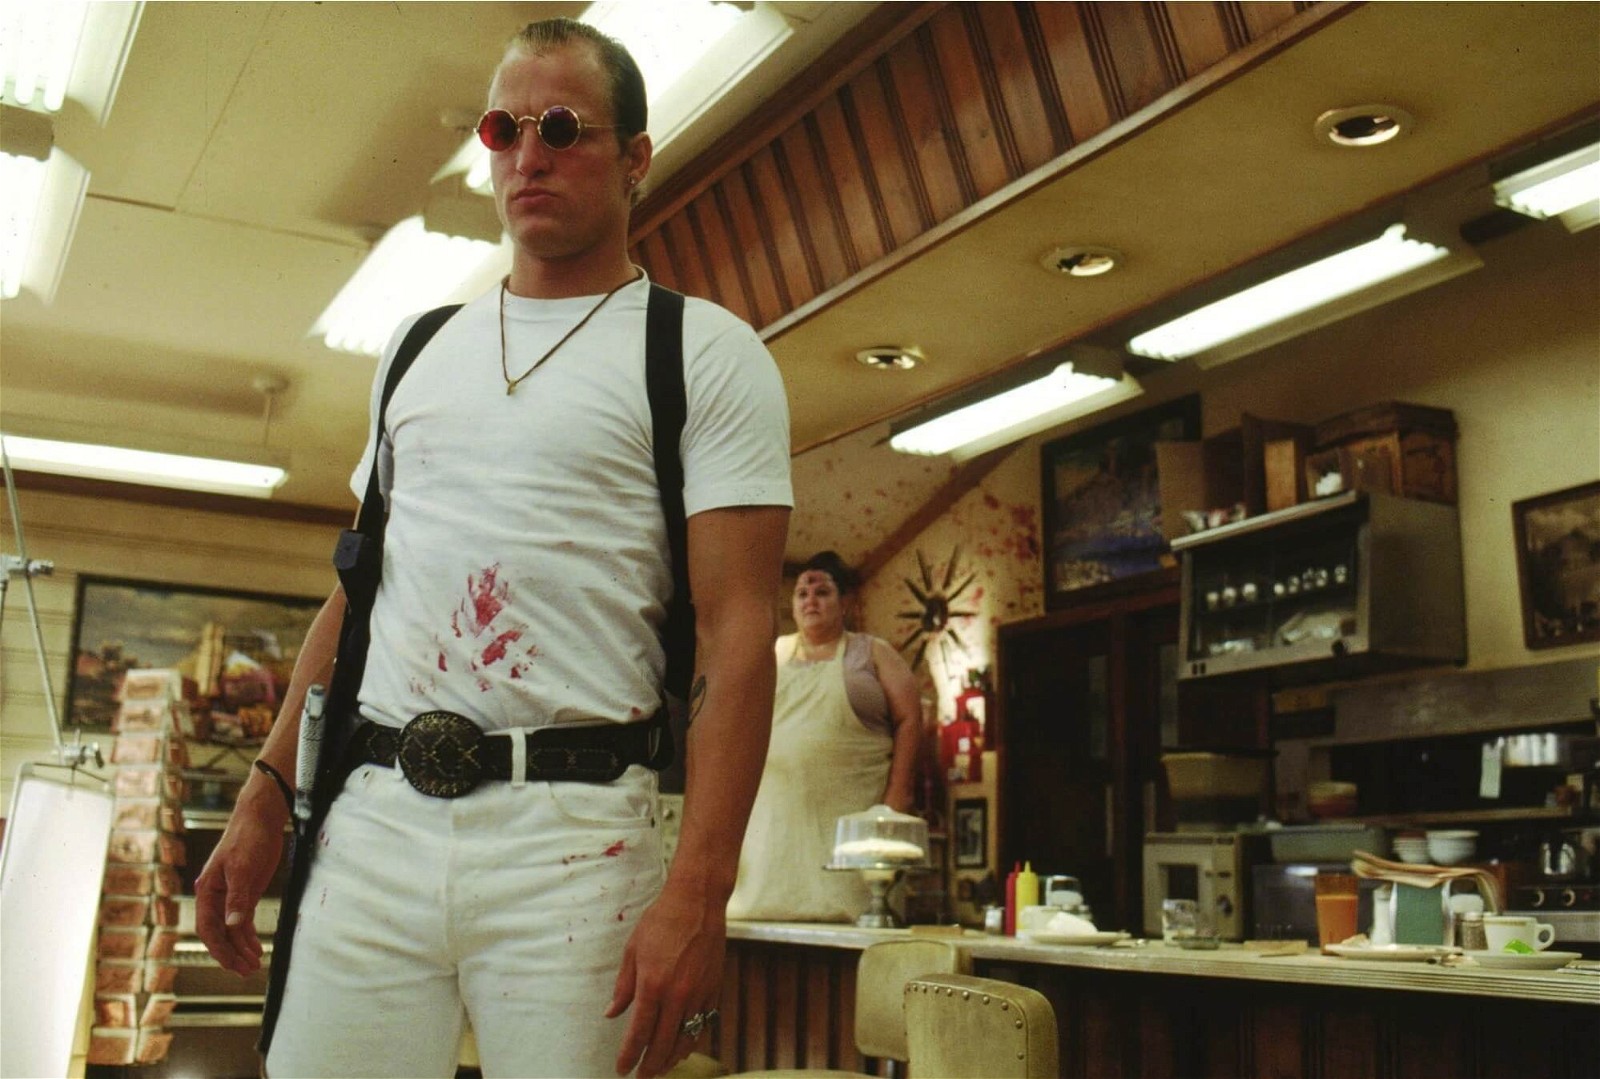 Woody Harrelson's Natural Born Killers role lost him the lead role in A Time To Kill